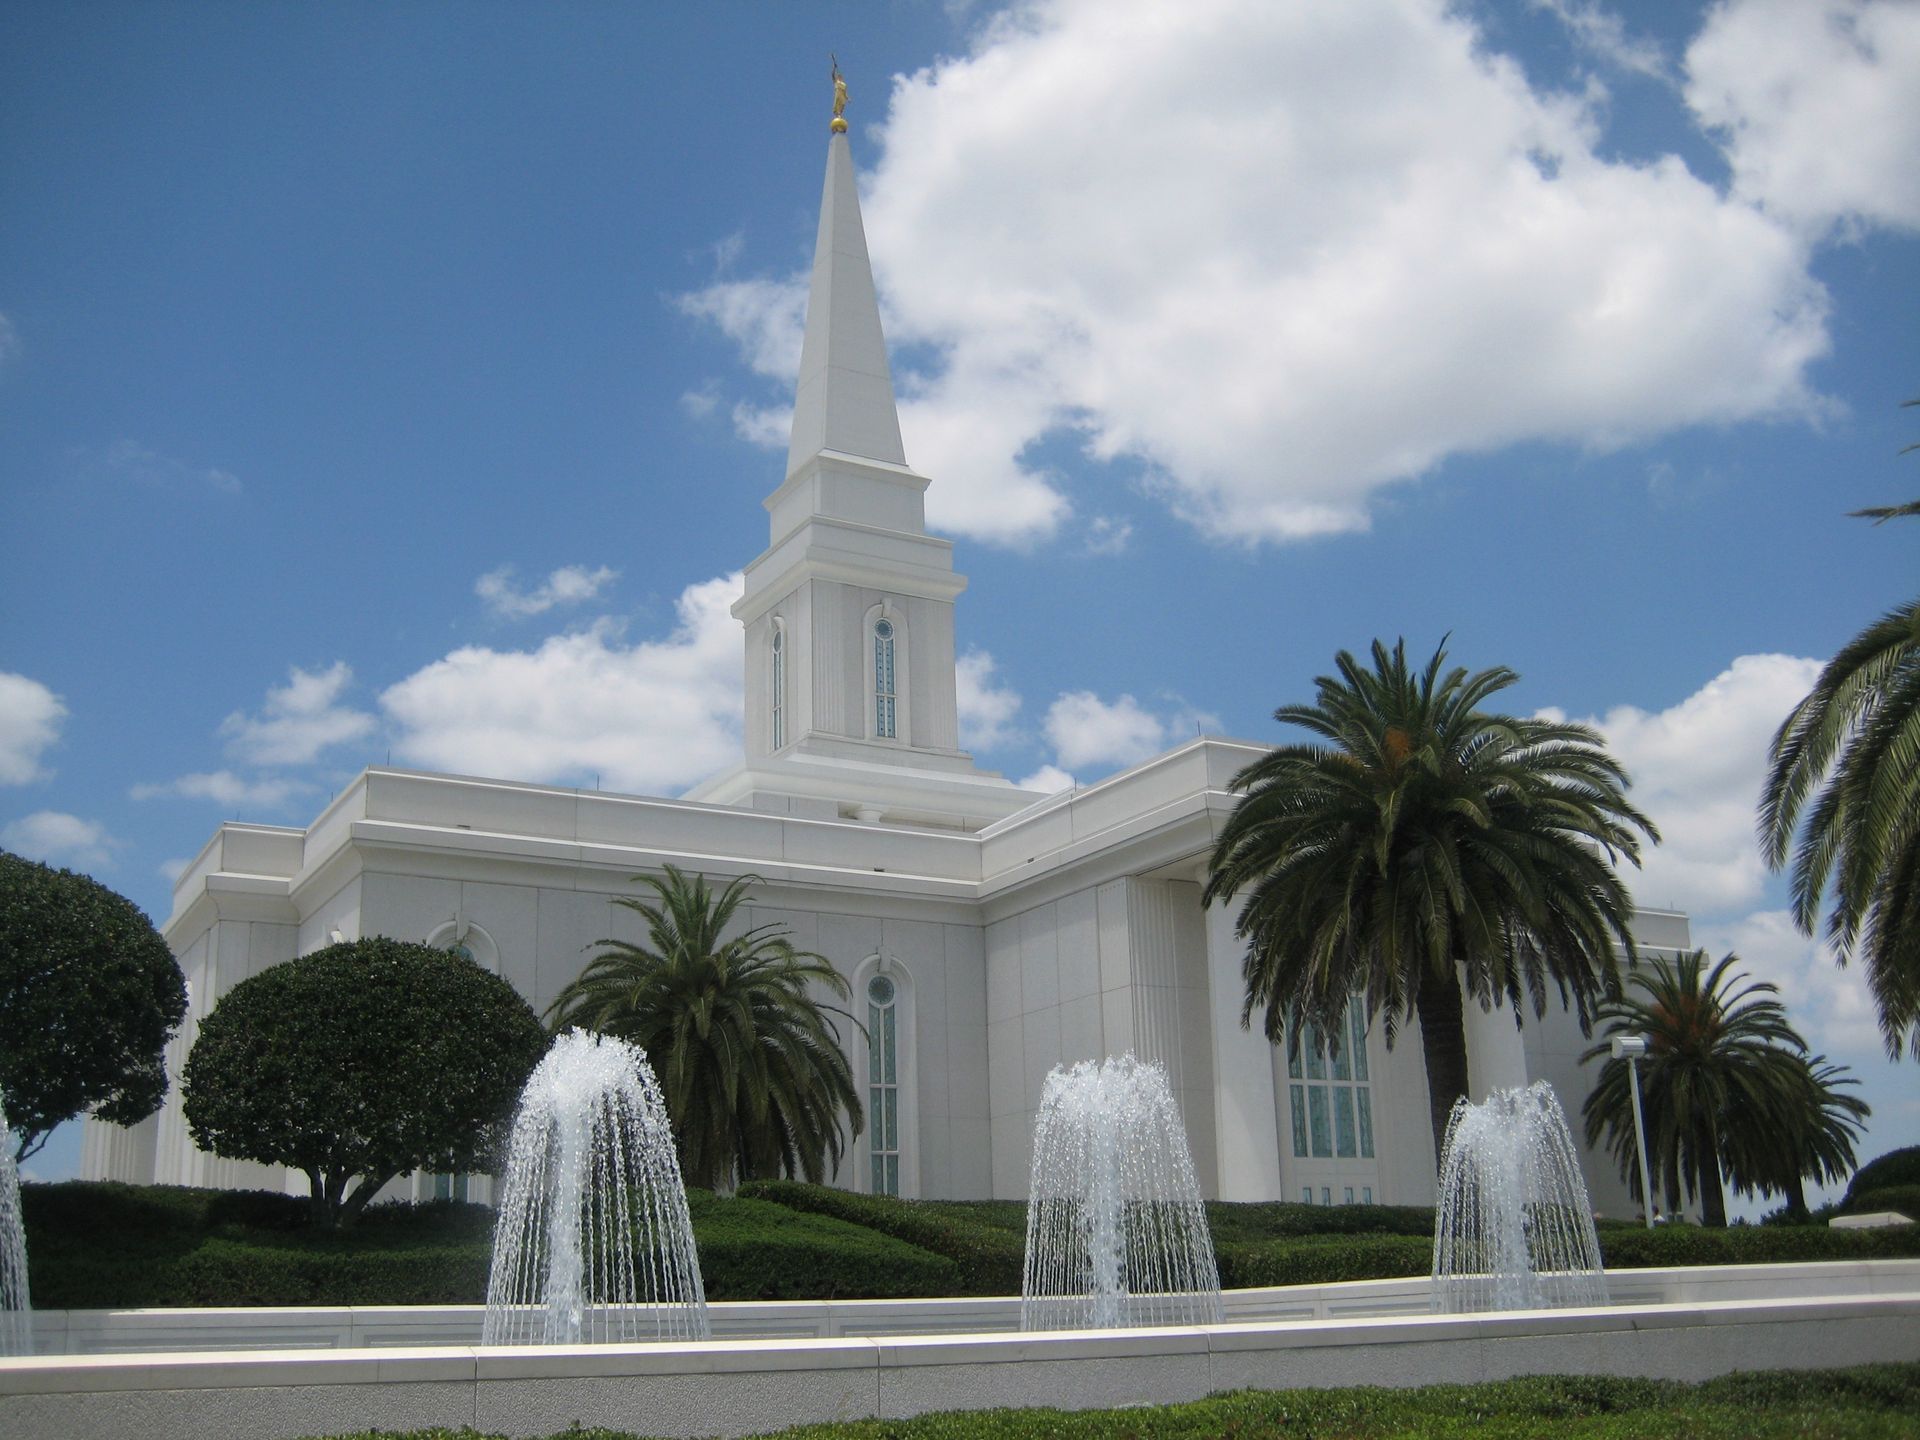 The Orlando Florida Temple fountains, including the exterior of the temple.